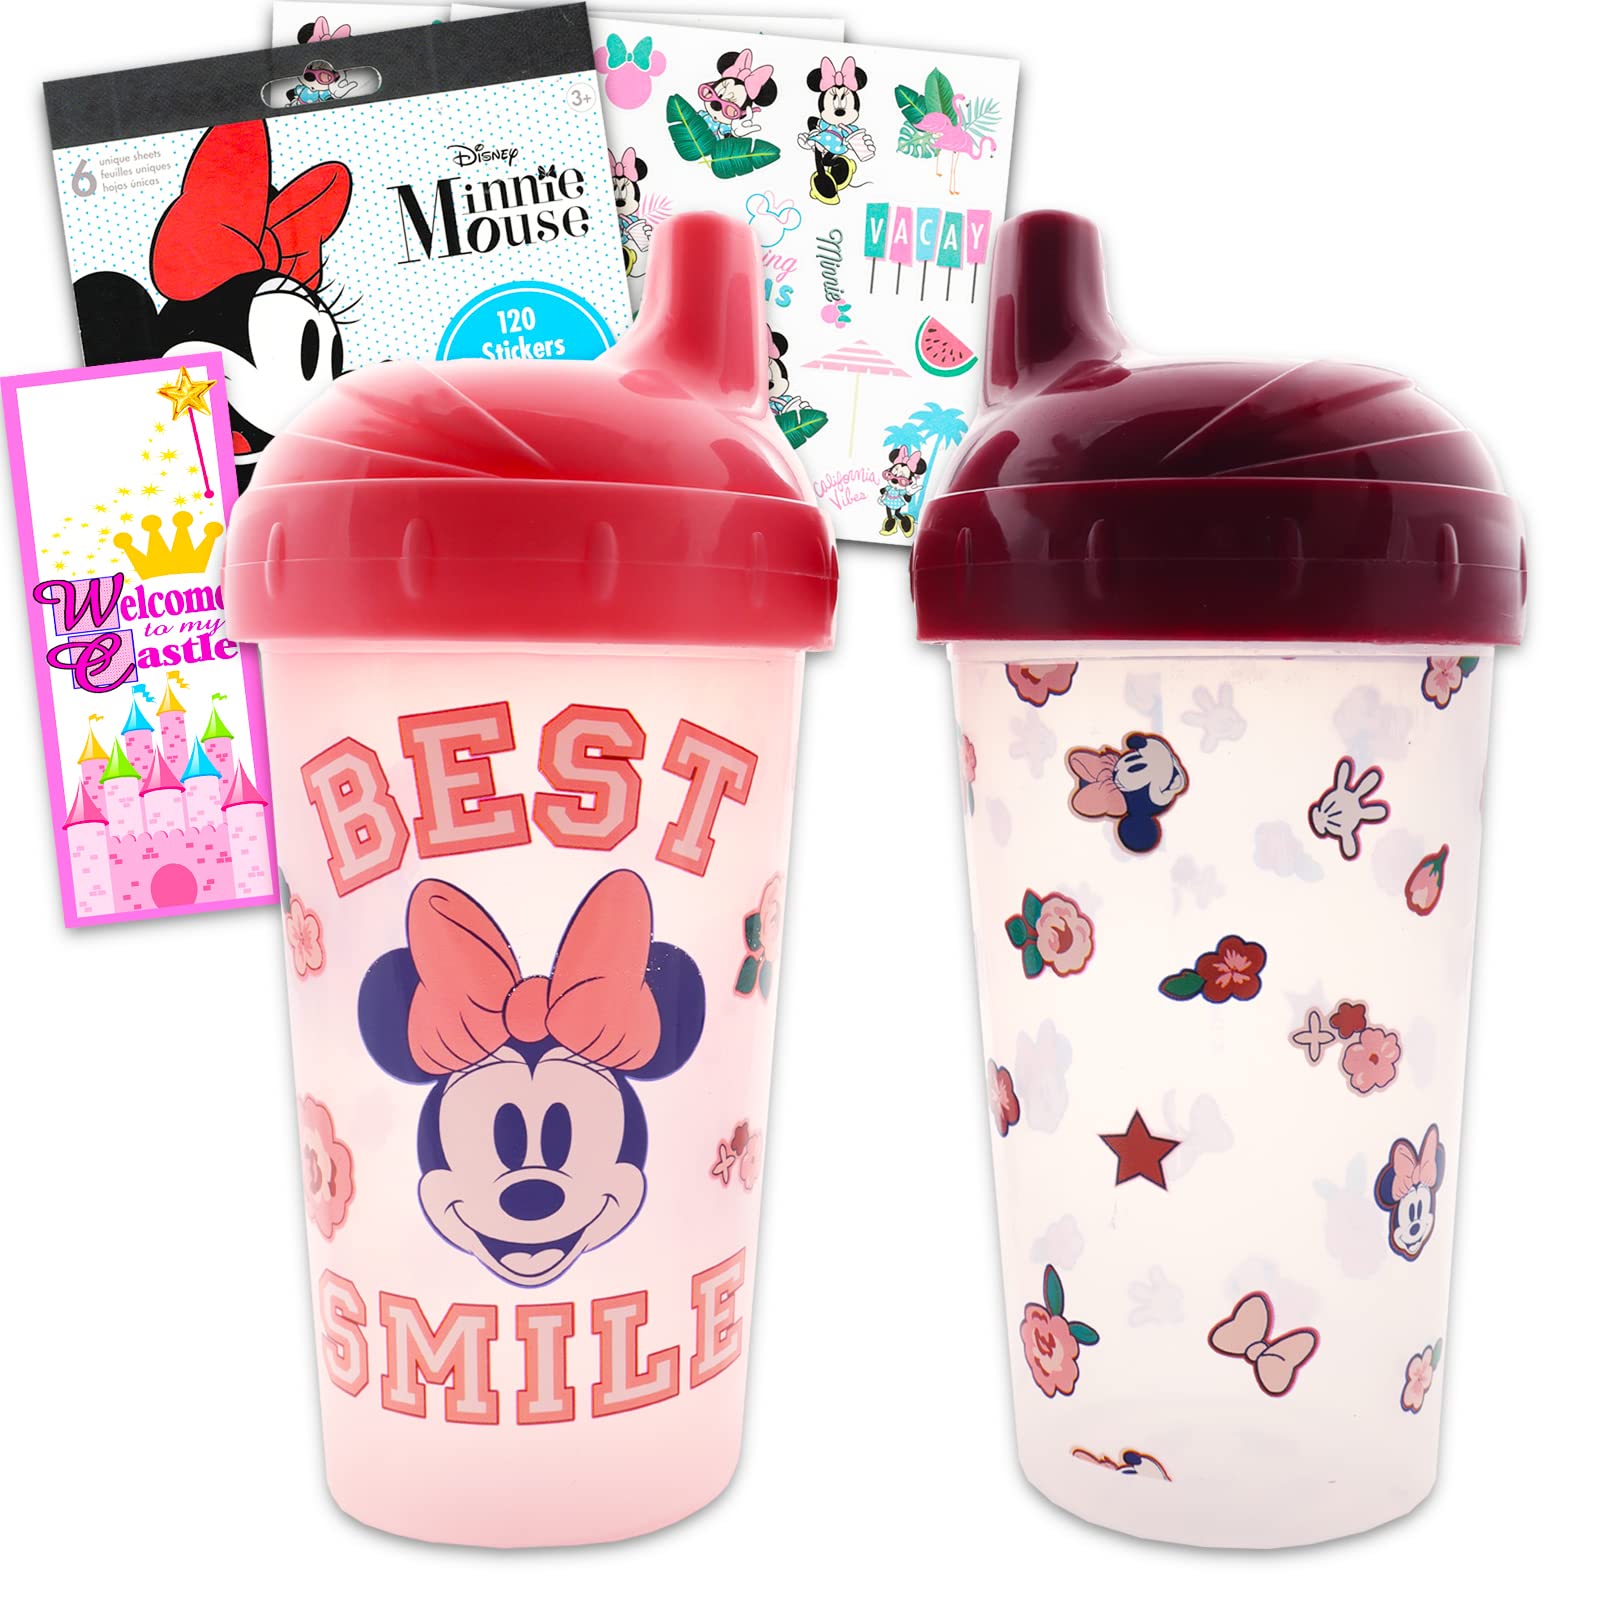 Classic Disney Disney Minnie Mouse Leak-Proof Sipper cup Set for Kids - Bundle with 2 Disney Spill-Proof Sippy cups Plus Minnie Stickers and Mo